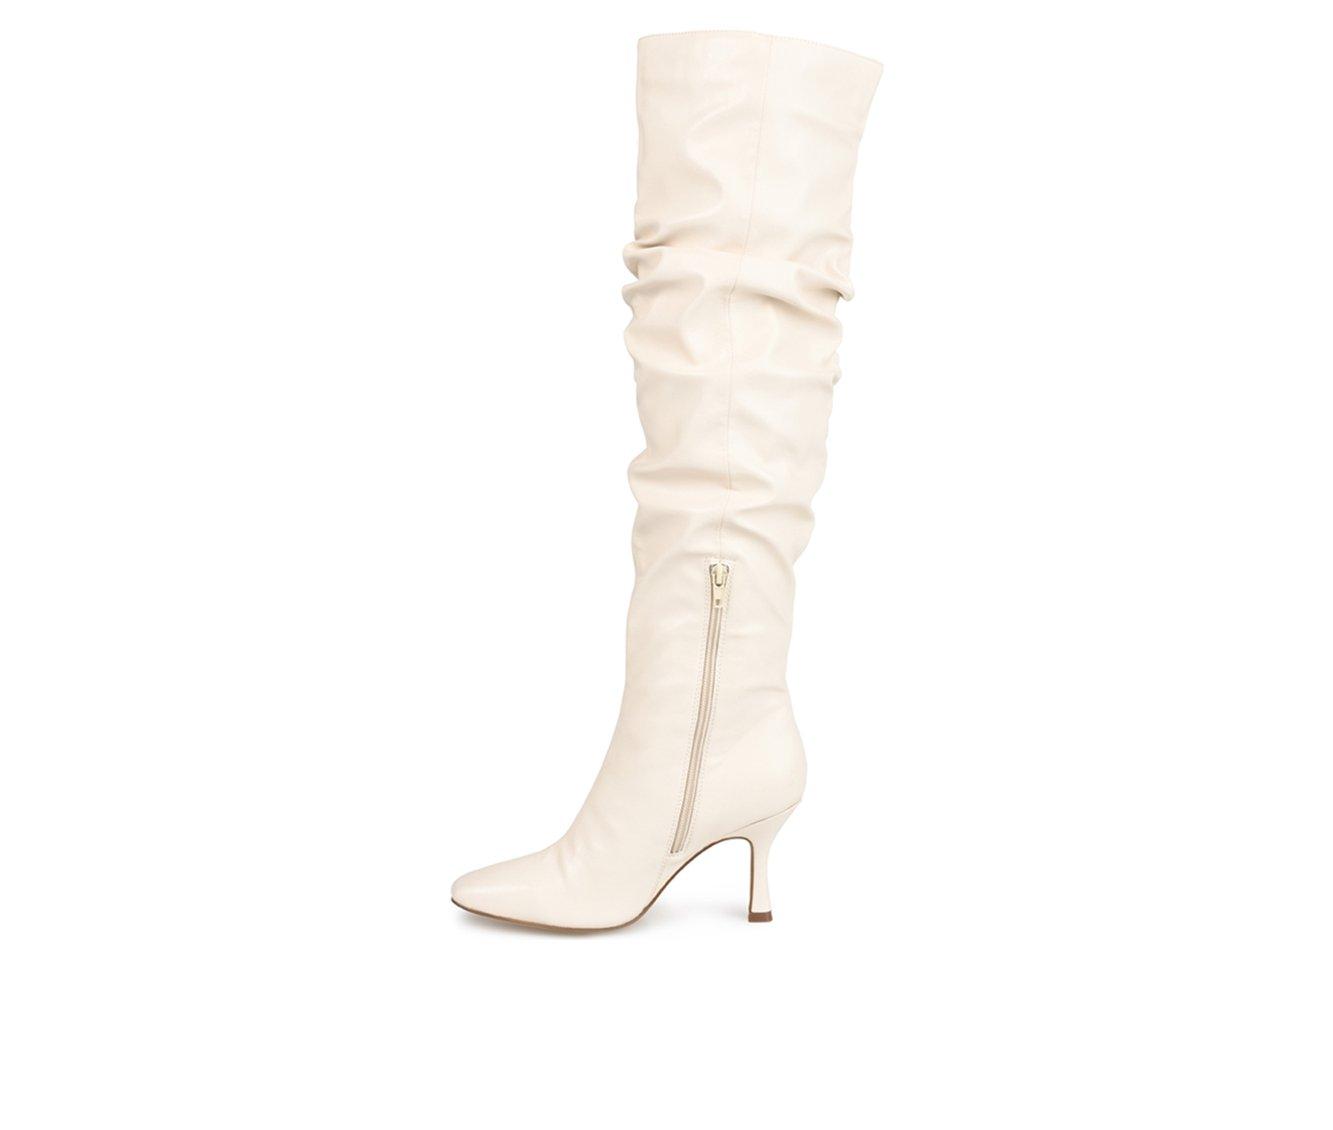 Women's Journee Collection Kindy Extra Wide Calf Knee High Boots